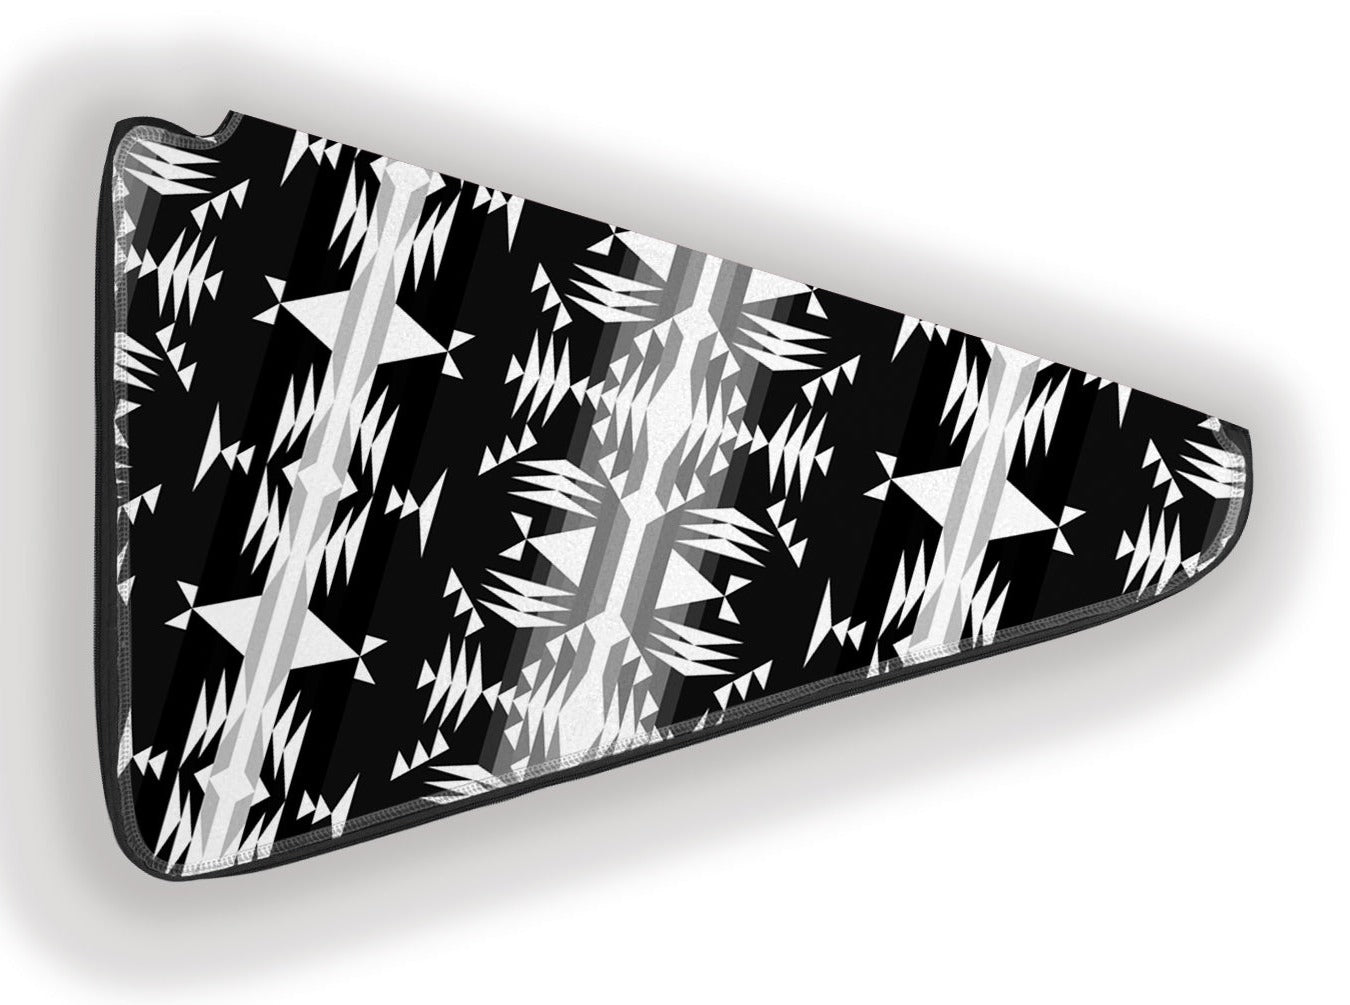 27 Inch Fan Case - Between the Mountains Black and White